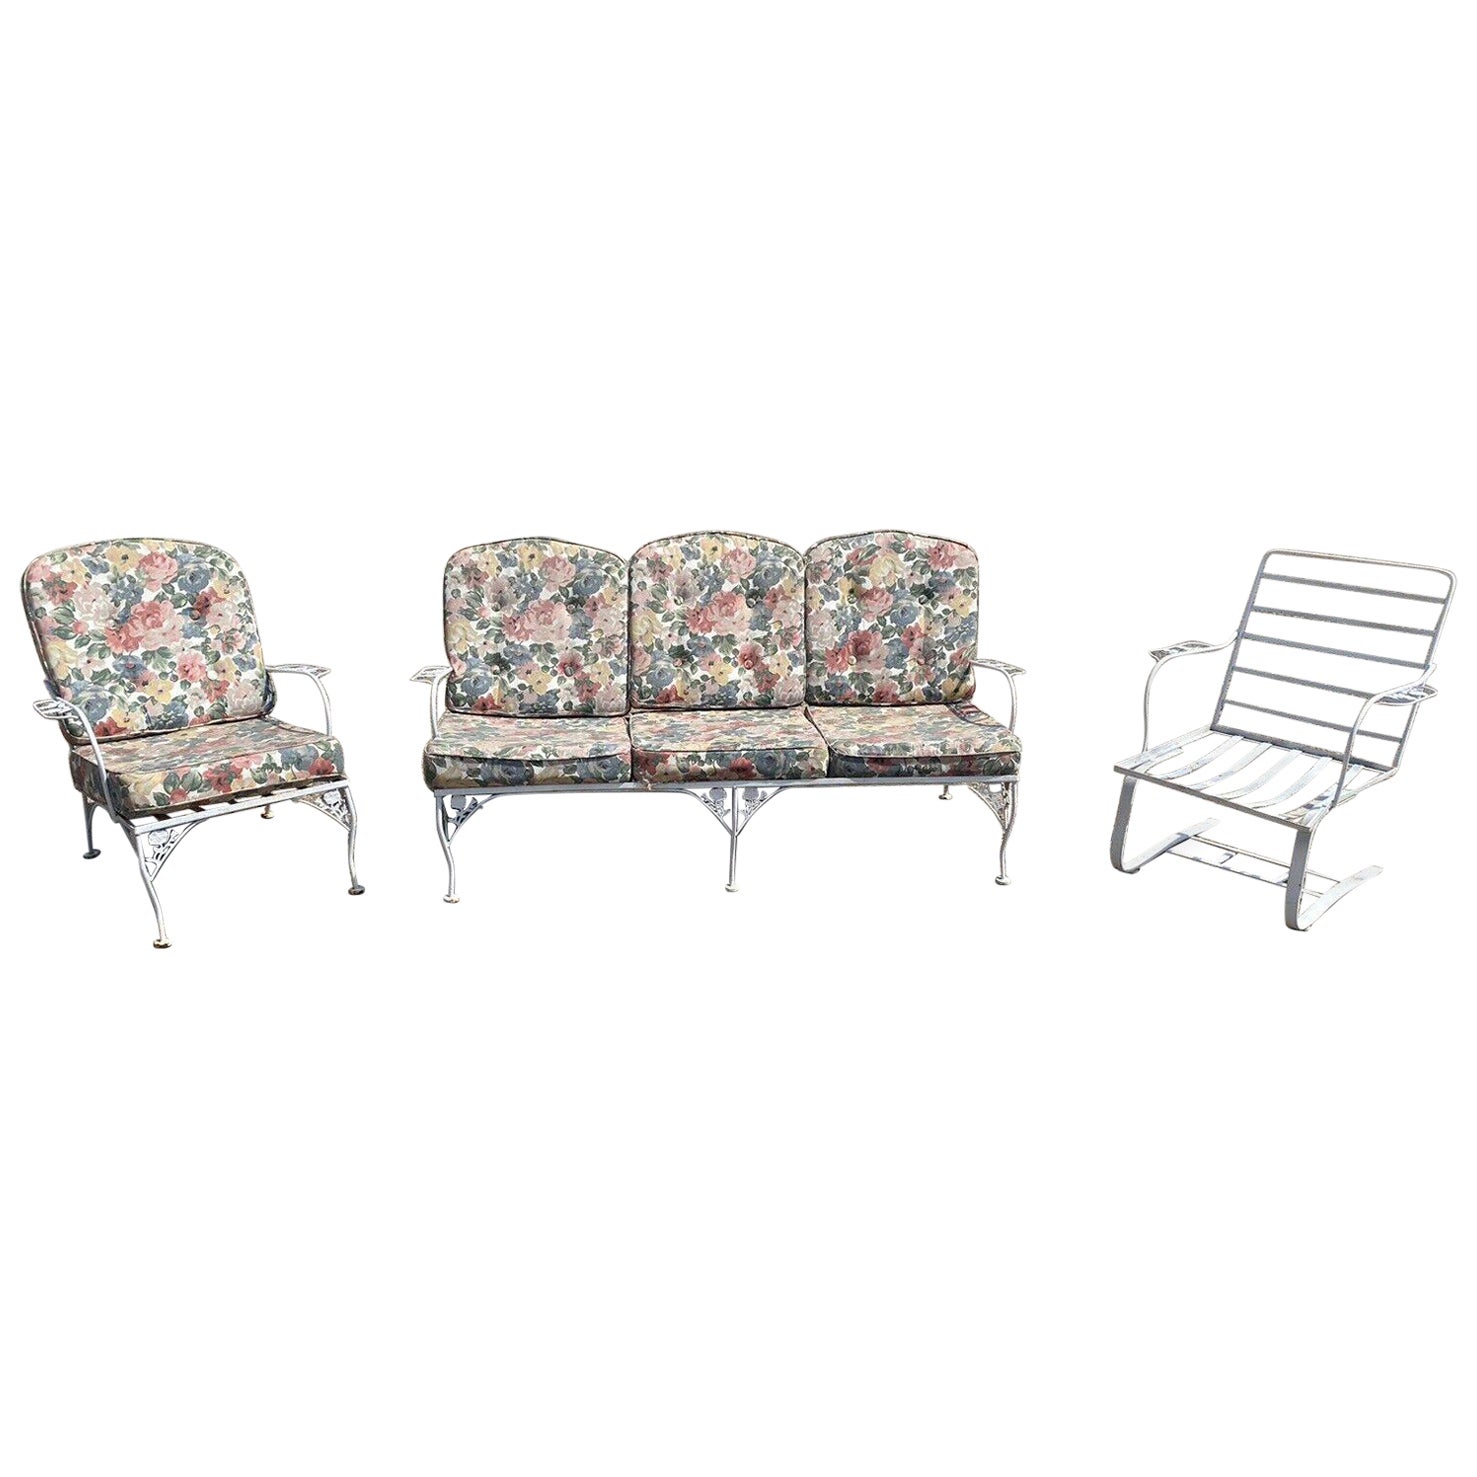 Vintage Meadowcraft Dogwood Wrought Iron Garden Patio Set Sofa Chairs, 3 Pc Set For Sale